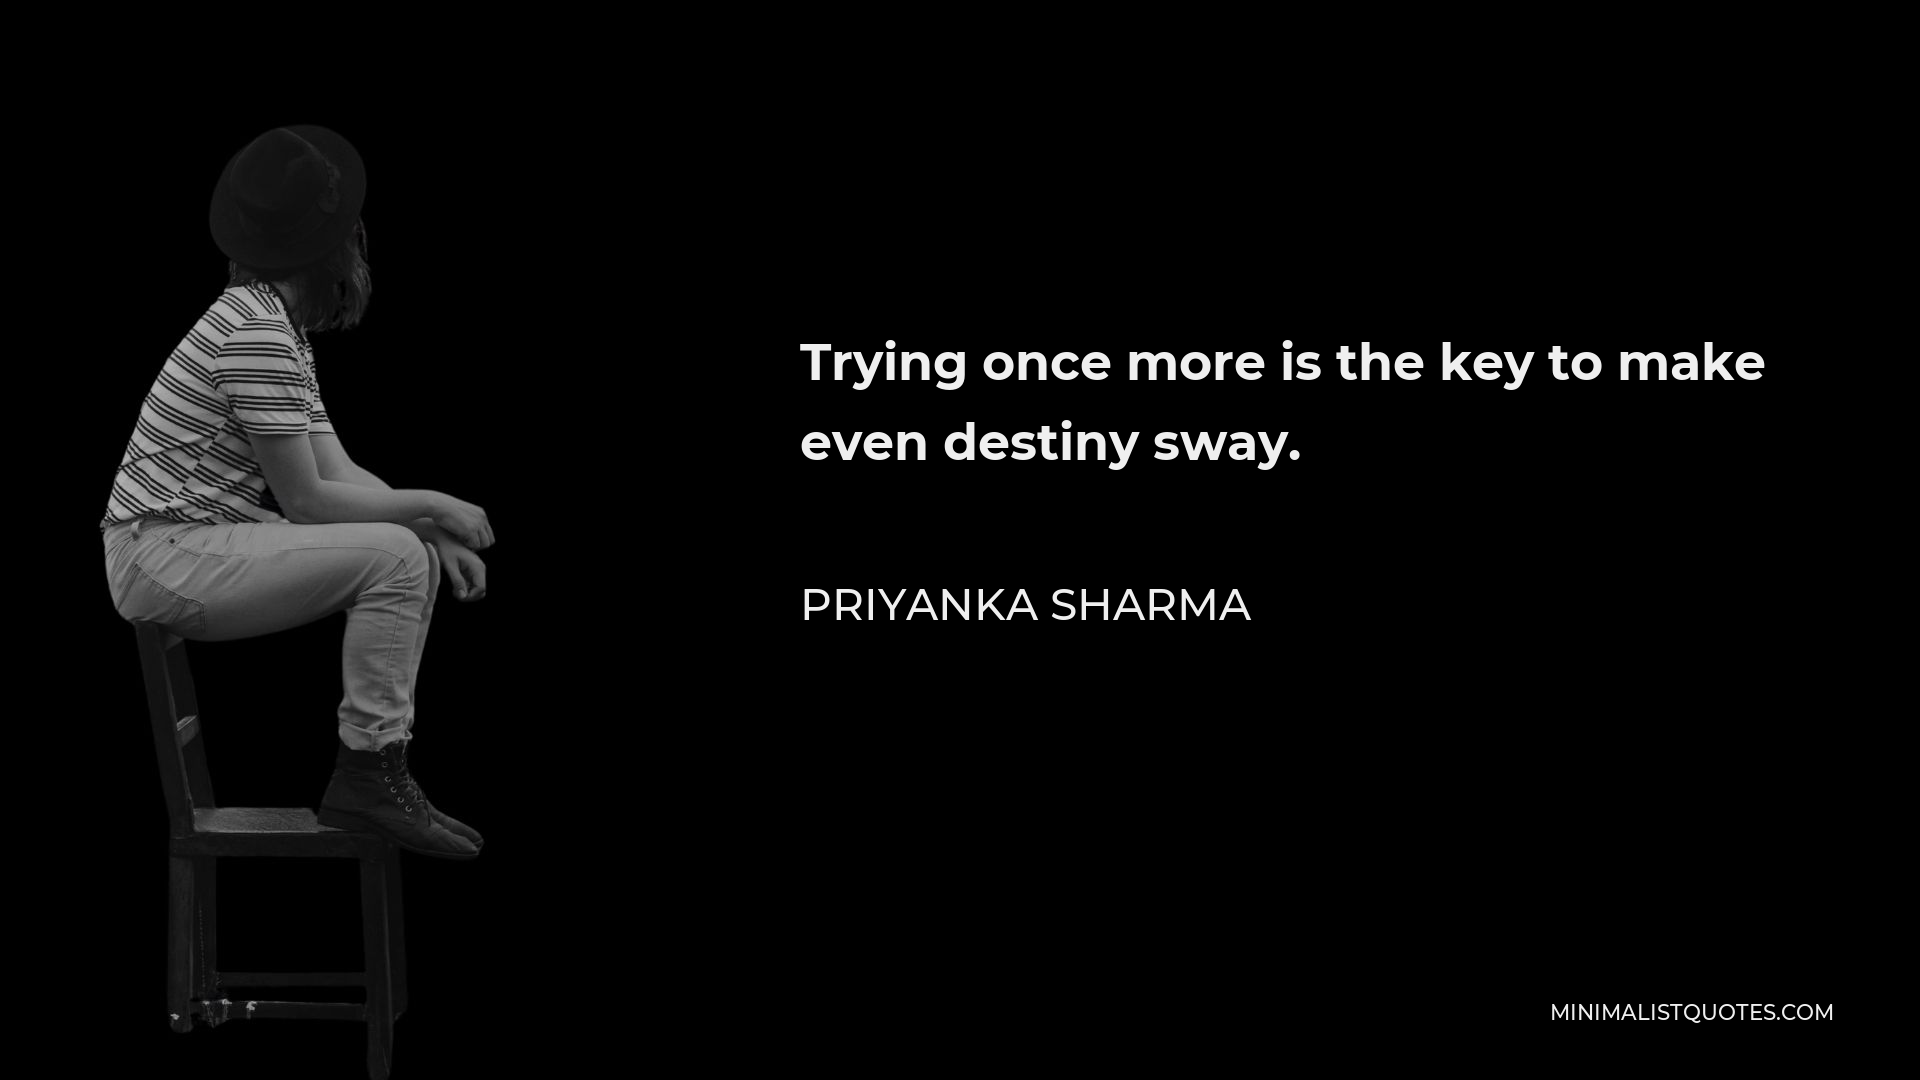 Priyanka Sharma Quote - Trying once more is the key to make even destiny sway.